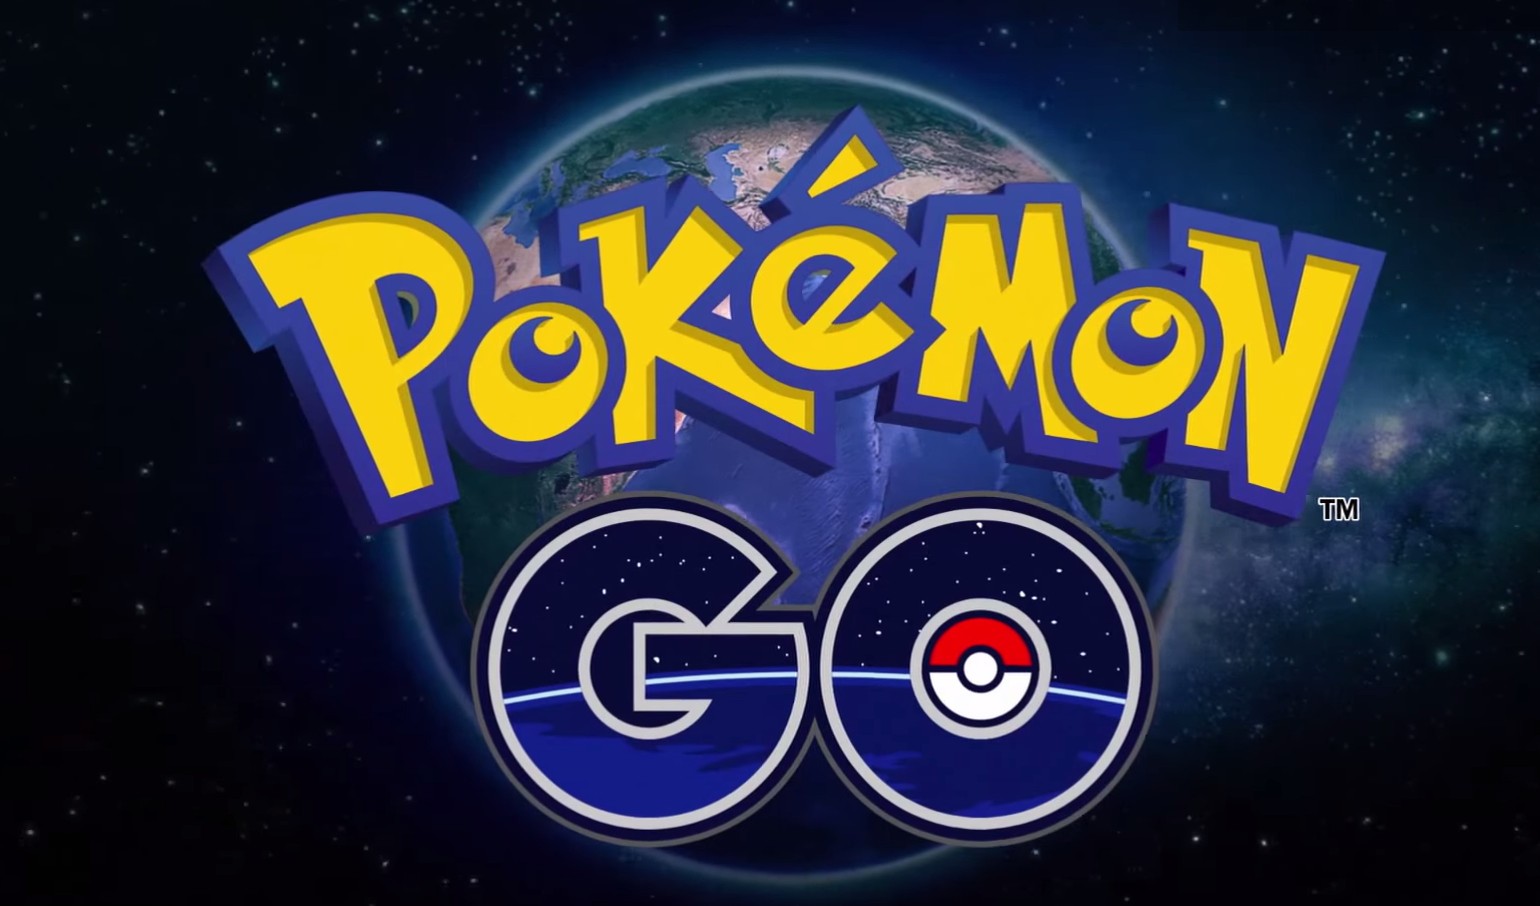 Nintendo Announces Pokemon Go Mobile Game Coming To Android And Ios In 2016